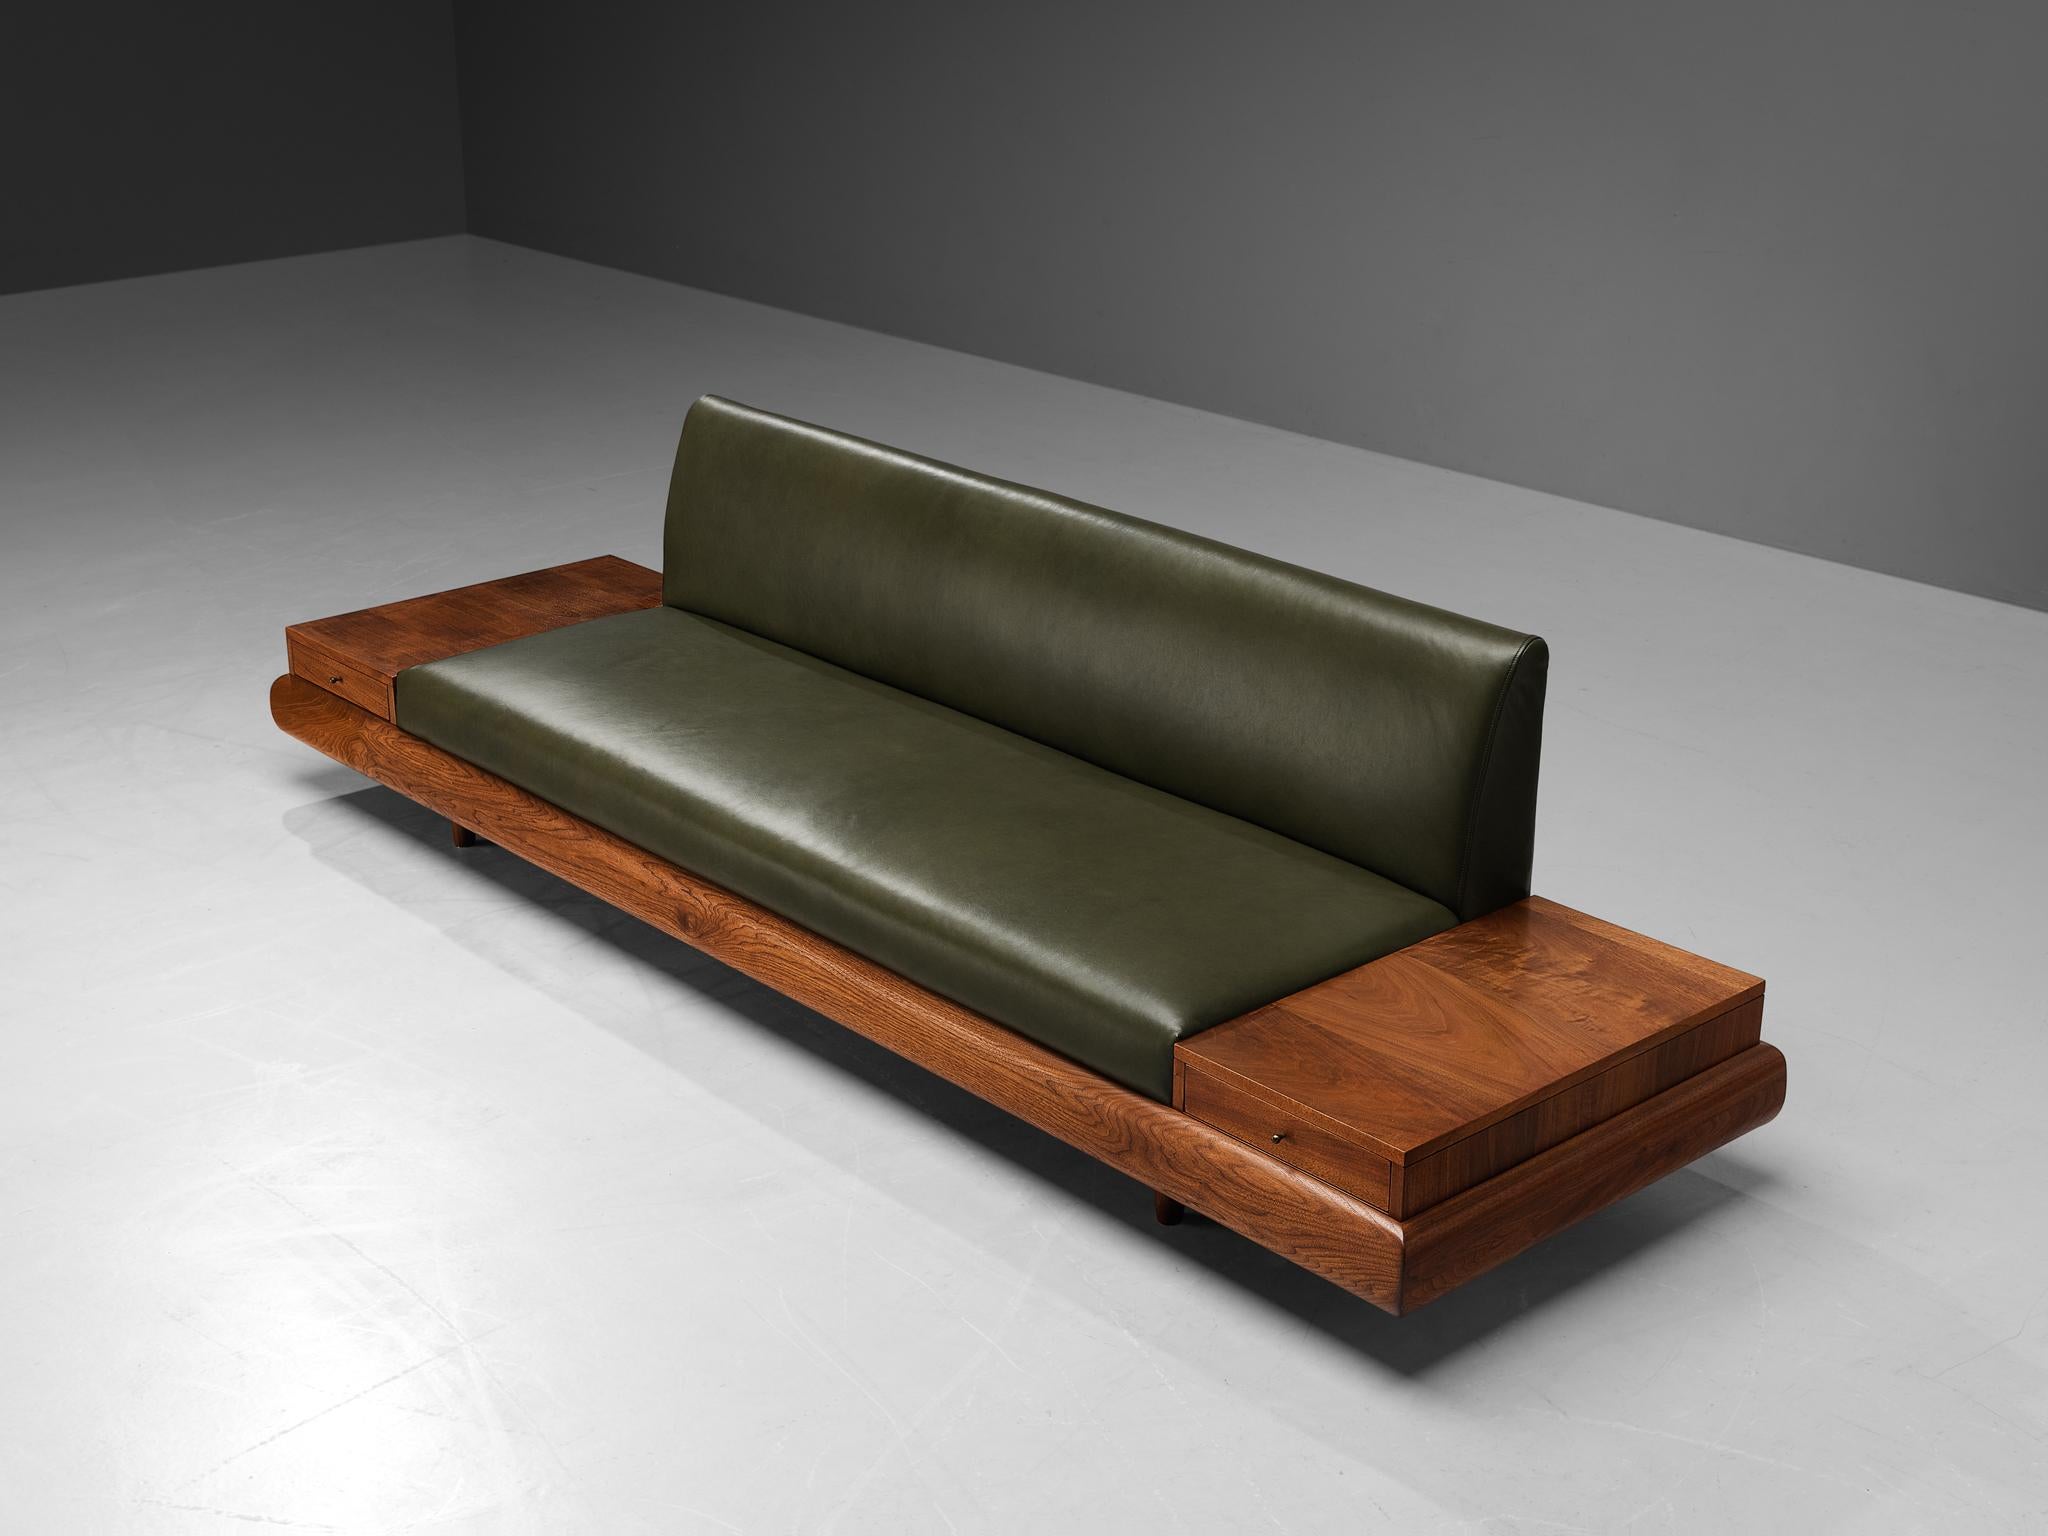 Adrian Pearsall, 'Platform' sofa with two drawers, model 1709-S, leather upholstery, walnut, United States, 1960s

Adrian Pearsall is known for his rather unique sofa designs. The '1709-S' is no exception. On a low base of a thick walnut frame